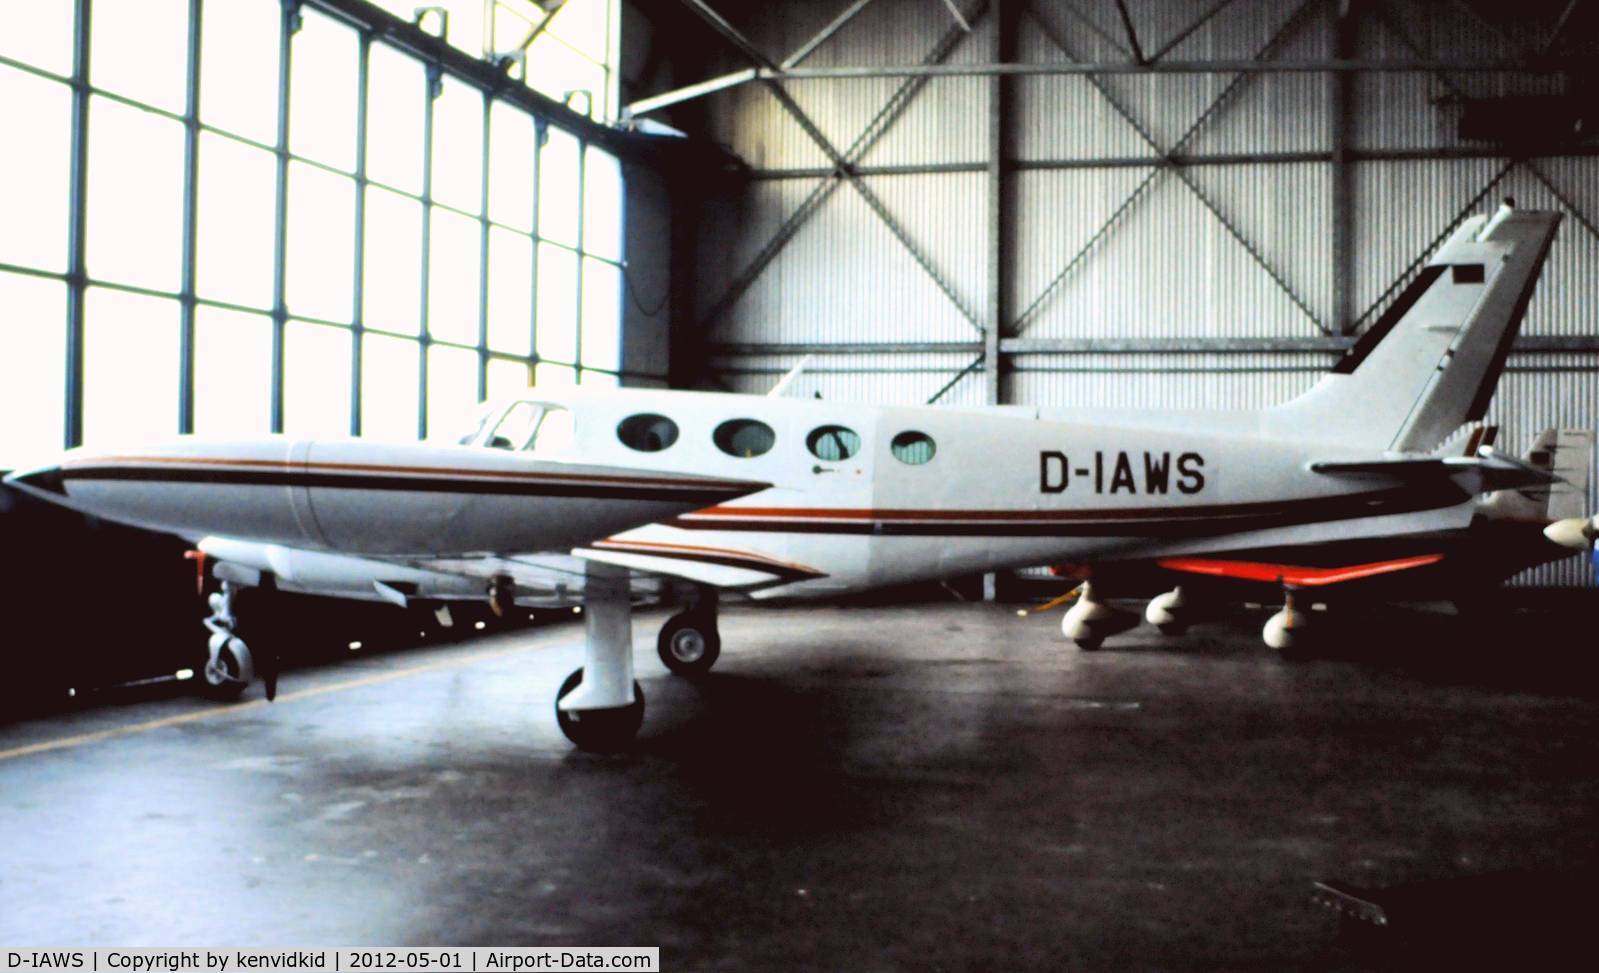 D-IAWS, Cessna 340 C/N Unknown, Early 80's Germany.